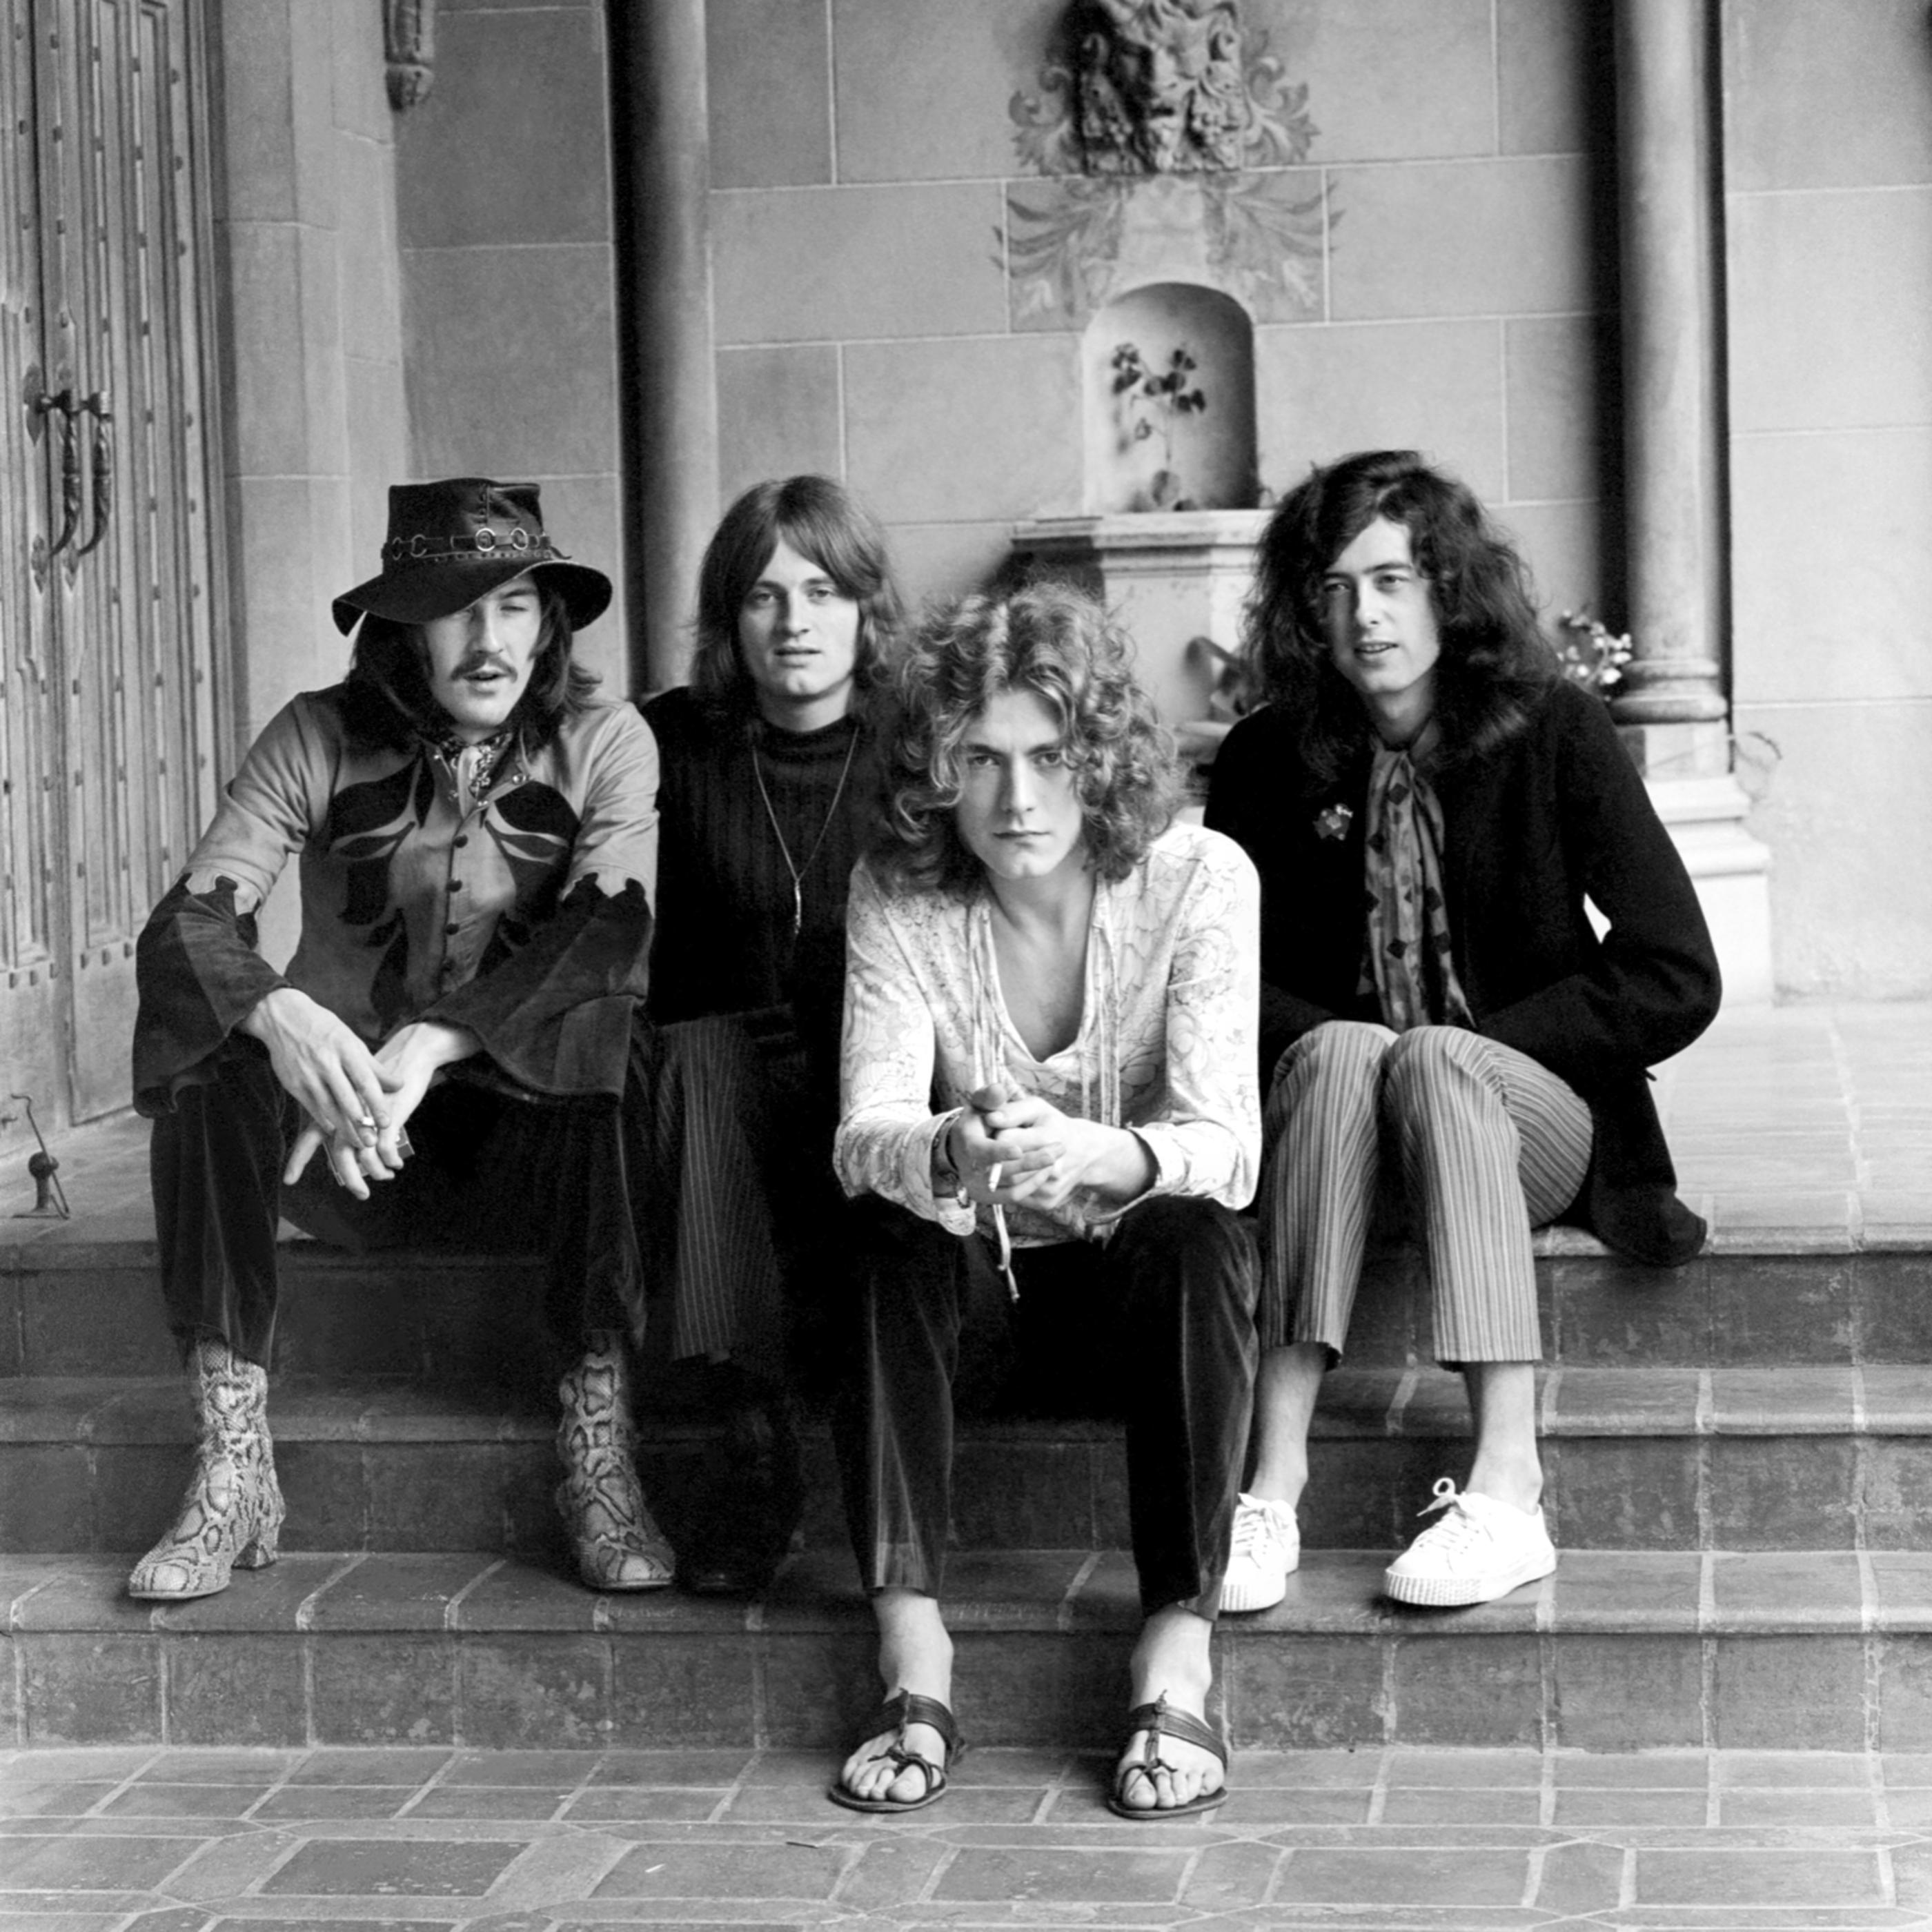 Led Zeppelin at Hollywood's Chateau Marmont 20" x 20" (Edition of 24) 